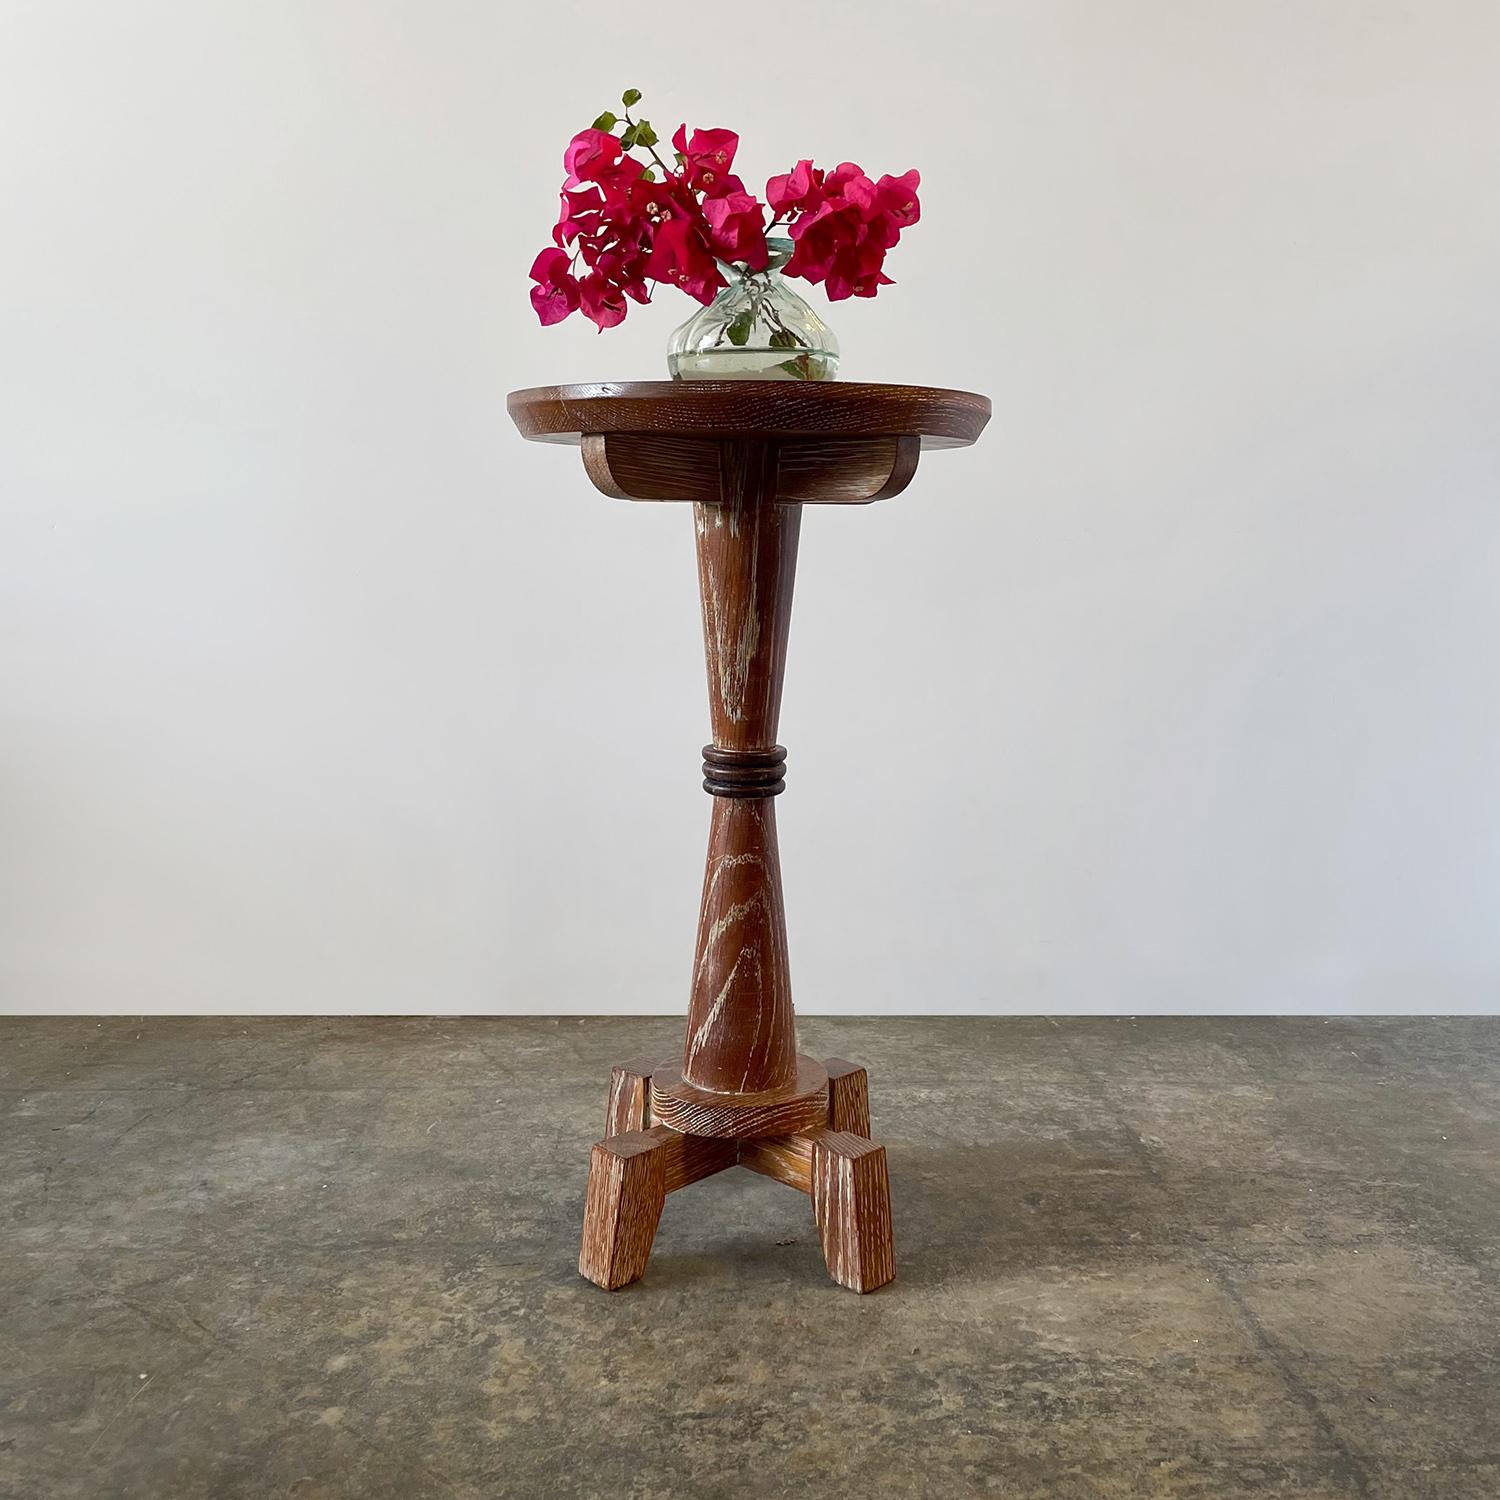 French cerused oak pedestal table
France, circa 1940’s
Solid aged oak shows natural color variations throughout
Rich wood grain detail
Patina from age and use
Newly reconditioned.